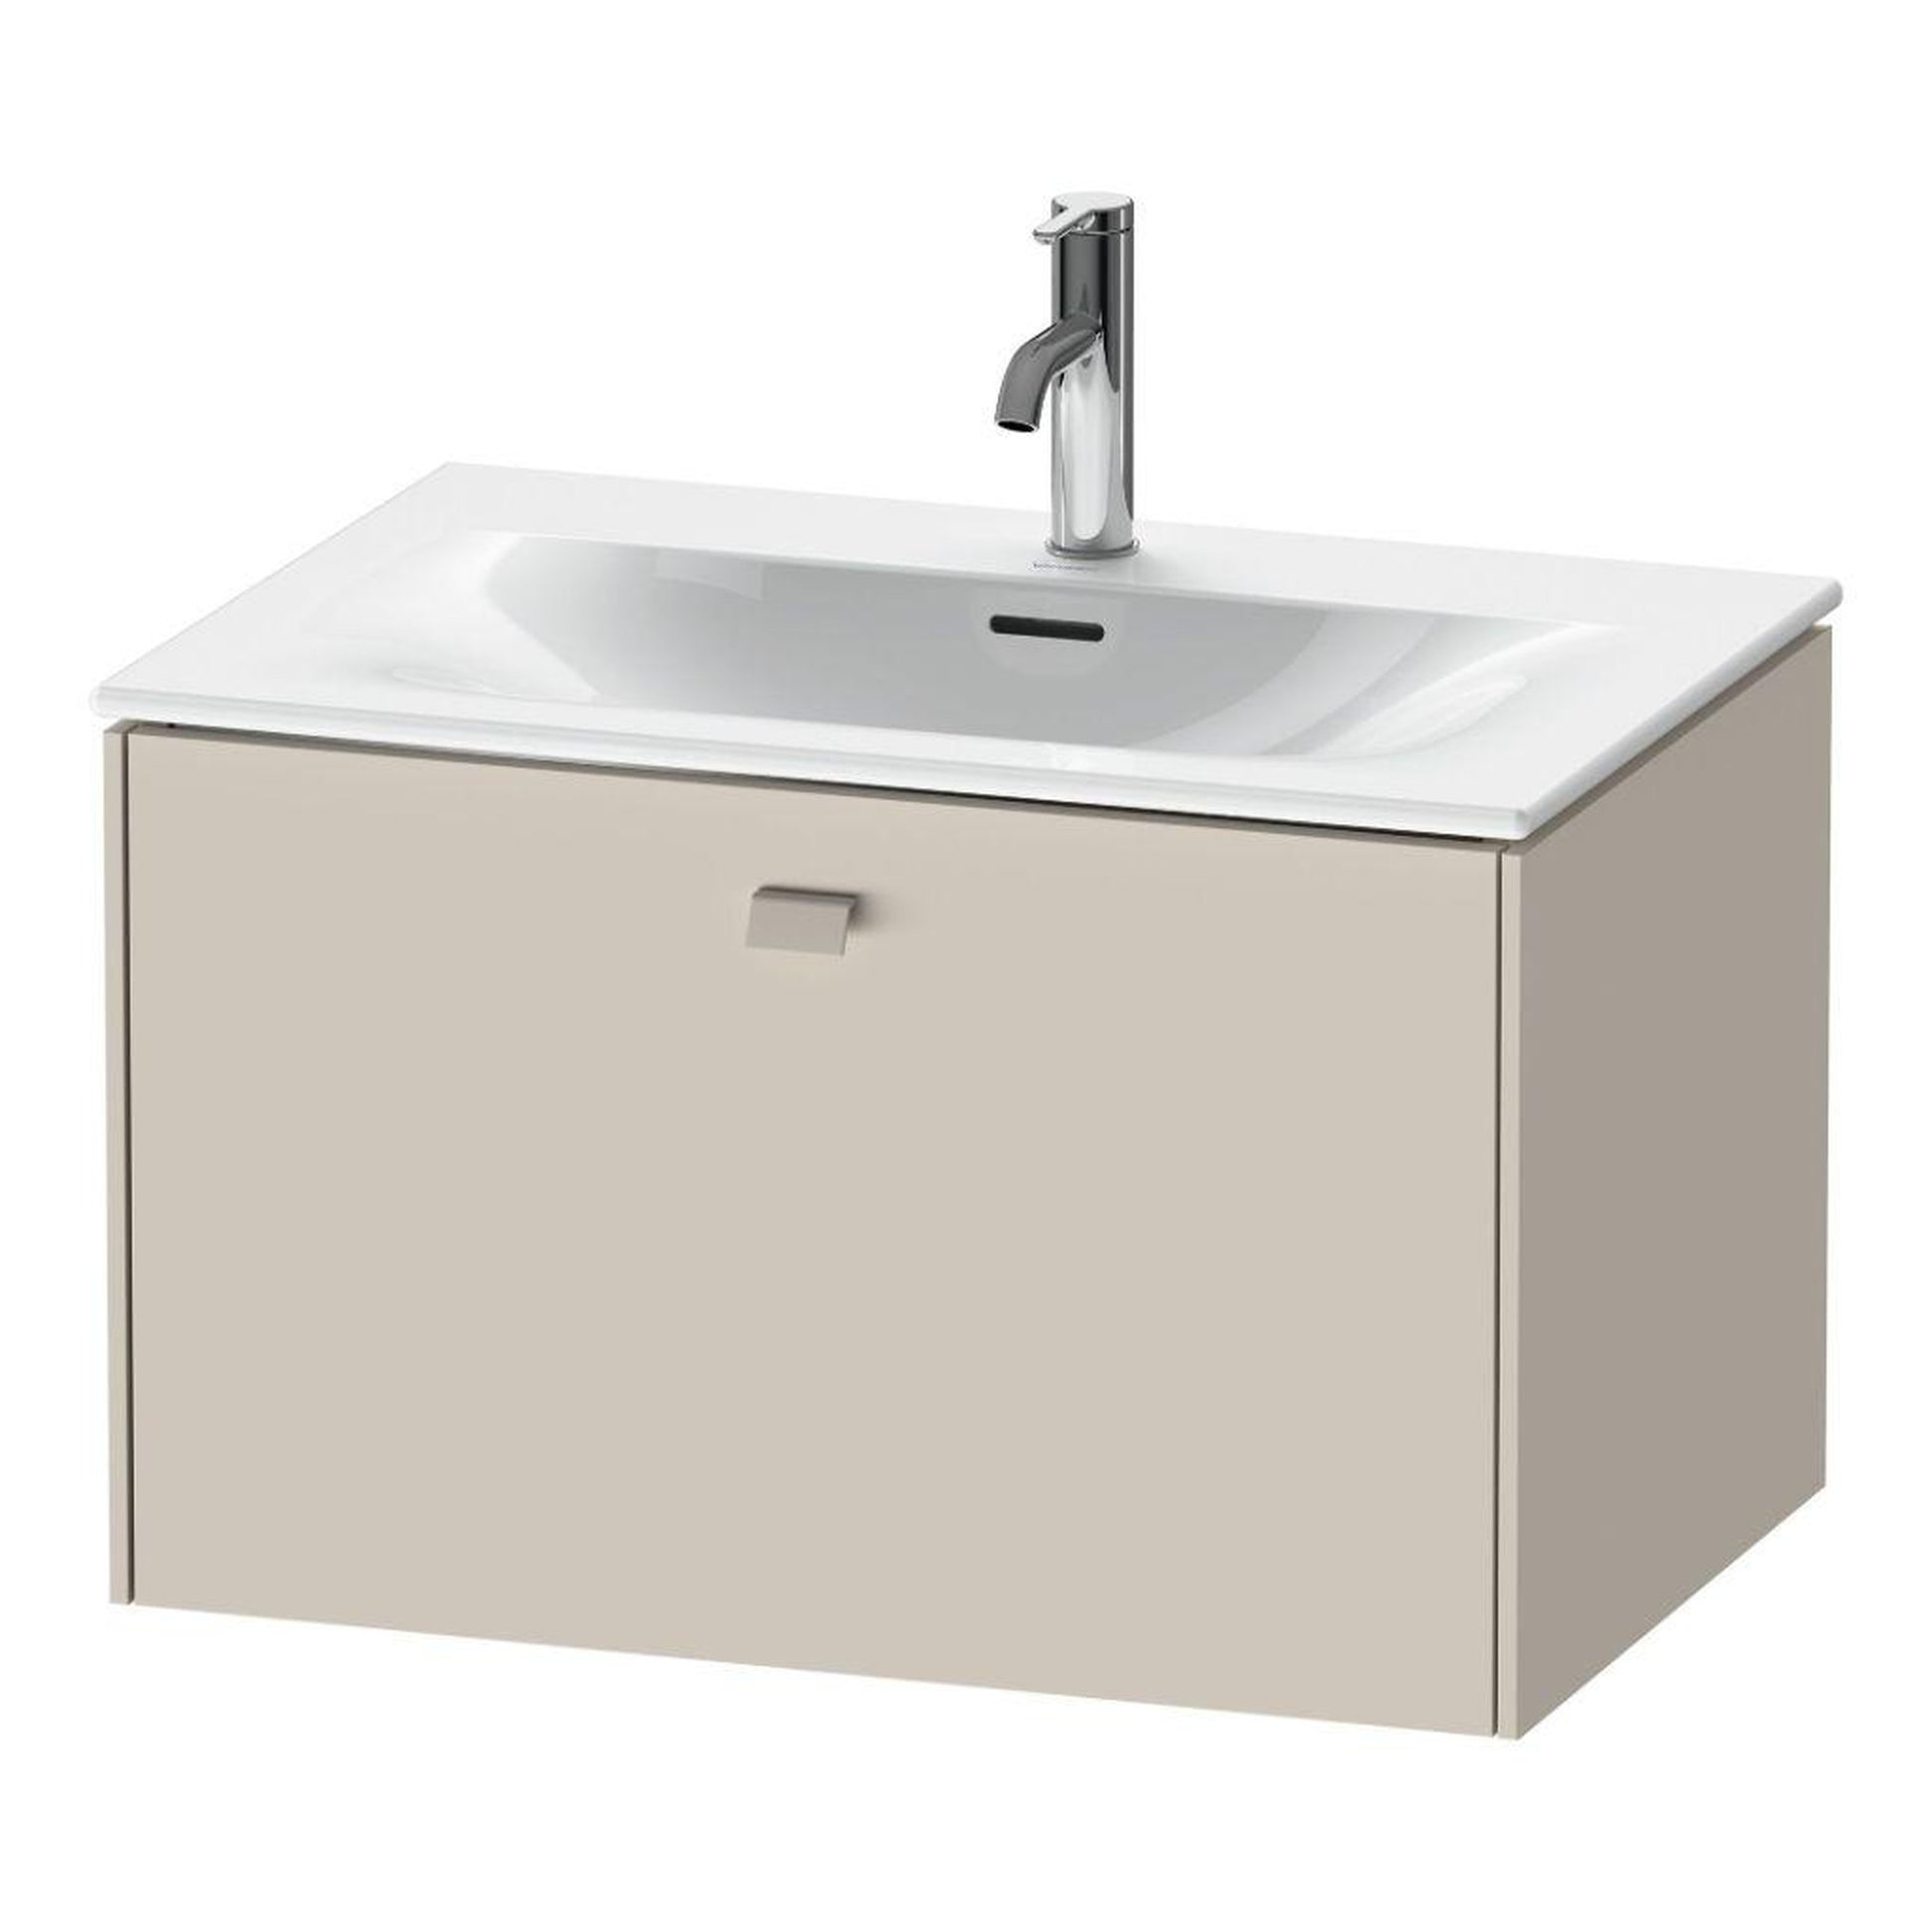 Duravit Brioso BR42110 28" x 17" x 19" One Drawer Wall-Mount Vanity Unit in Taupe